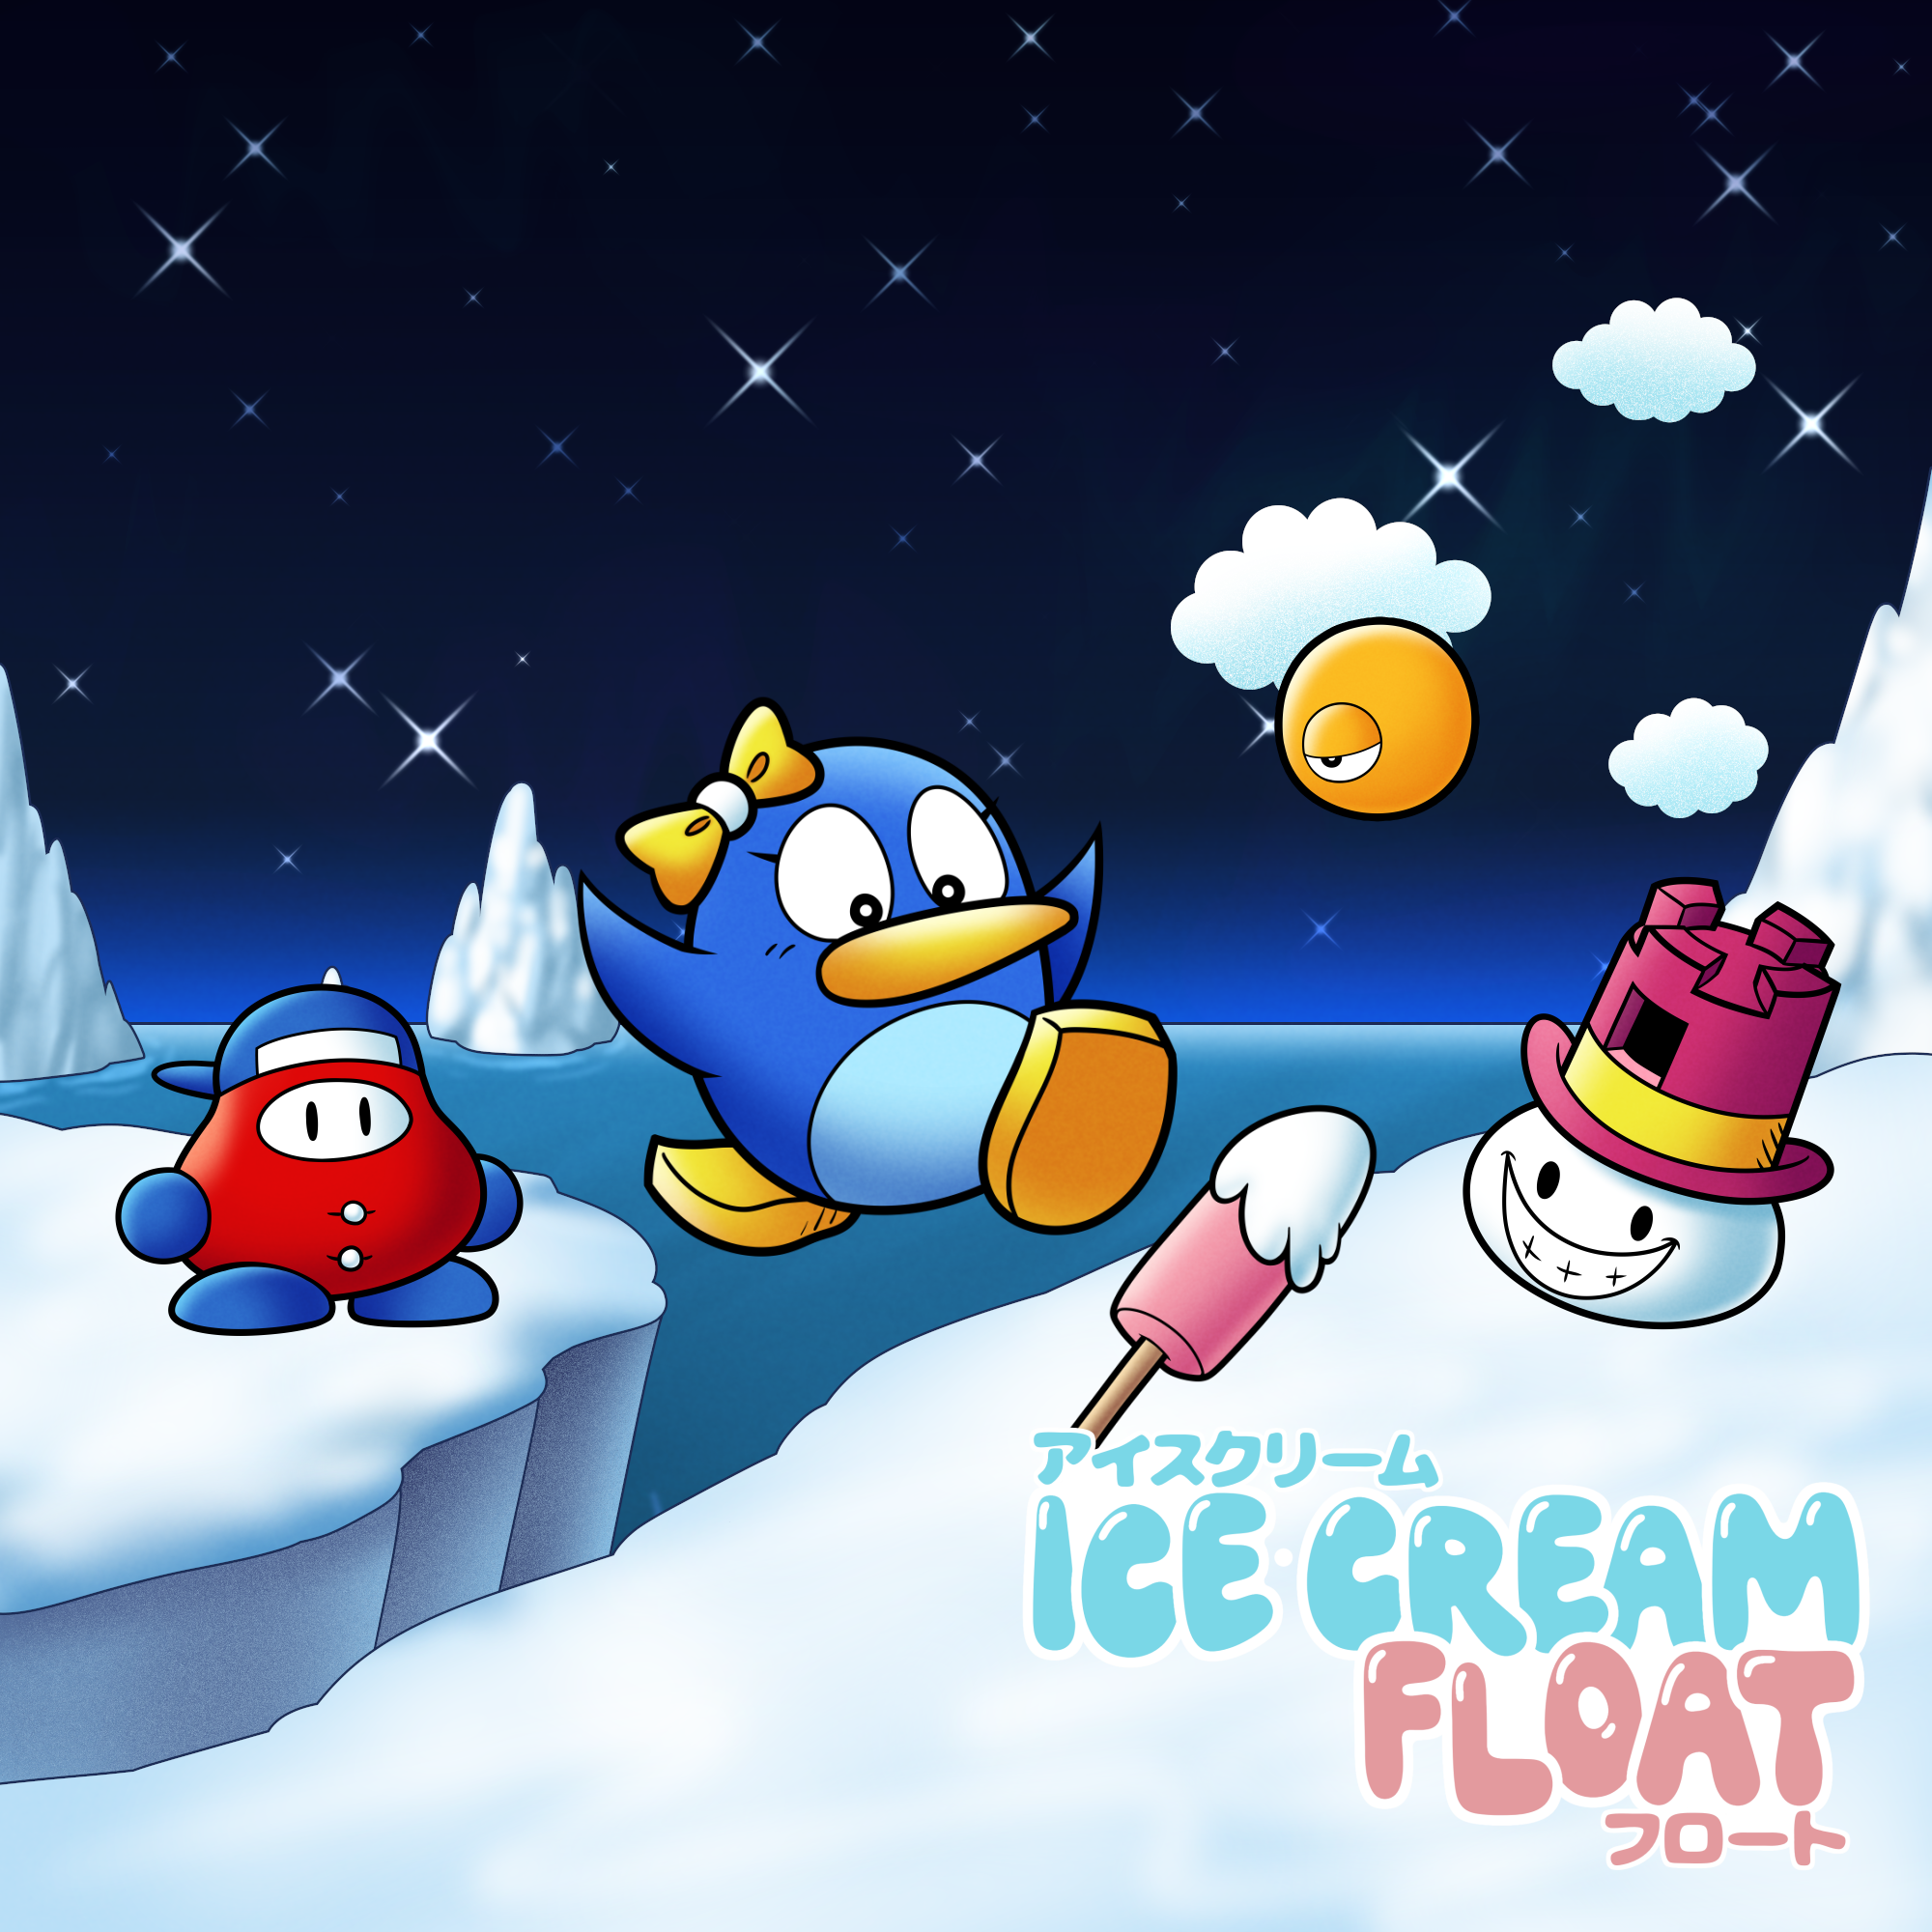 Browser Games - Bad Ice Cream - The Spriters Resource